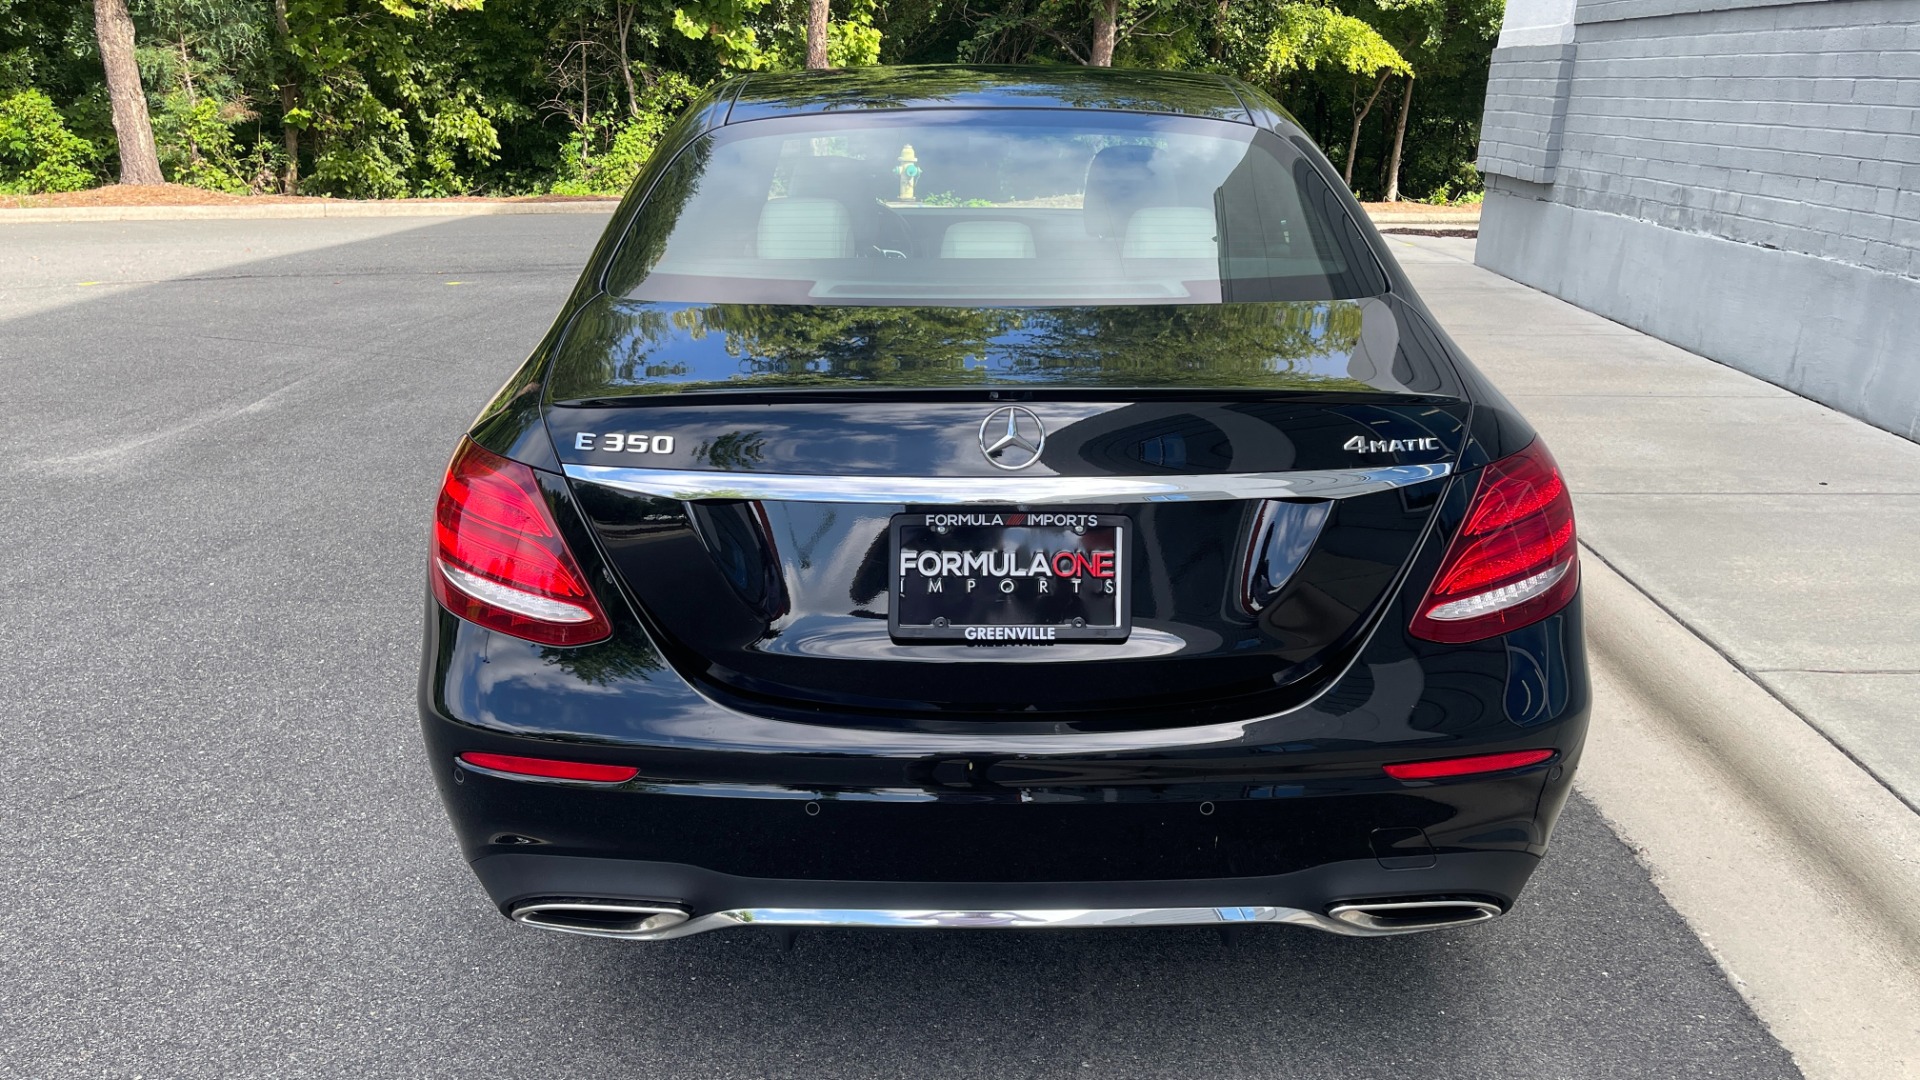 Used 2020 Mercedes-Benz E-Class E 350 / 4MATIC / AMG LINE / BURMESTER SOUND / PANORAMIC ROOF for sale Sold at Formula Imports in Charlotte NC 28227 5